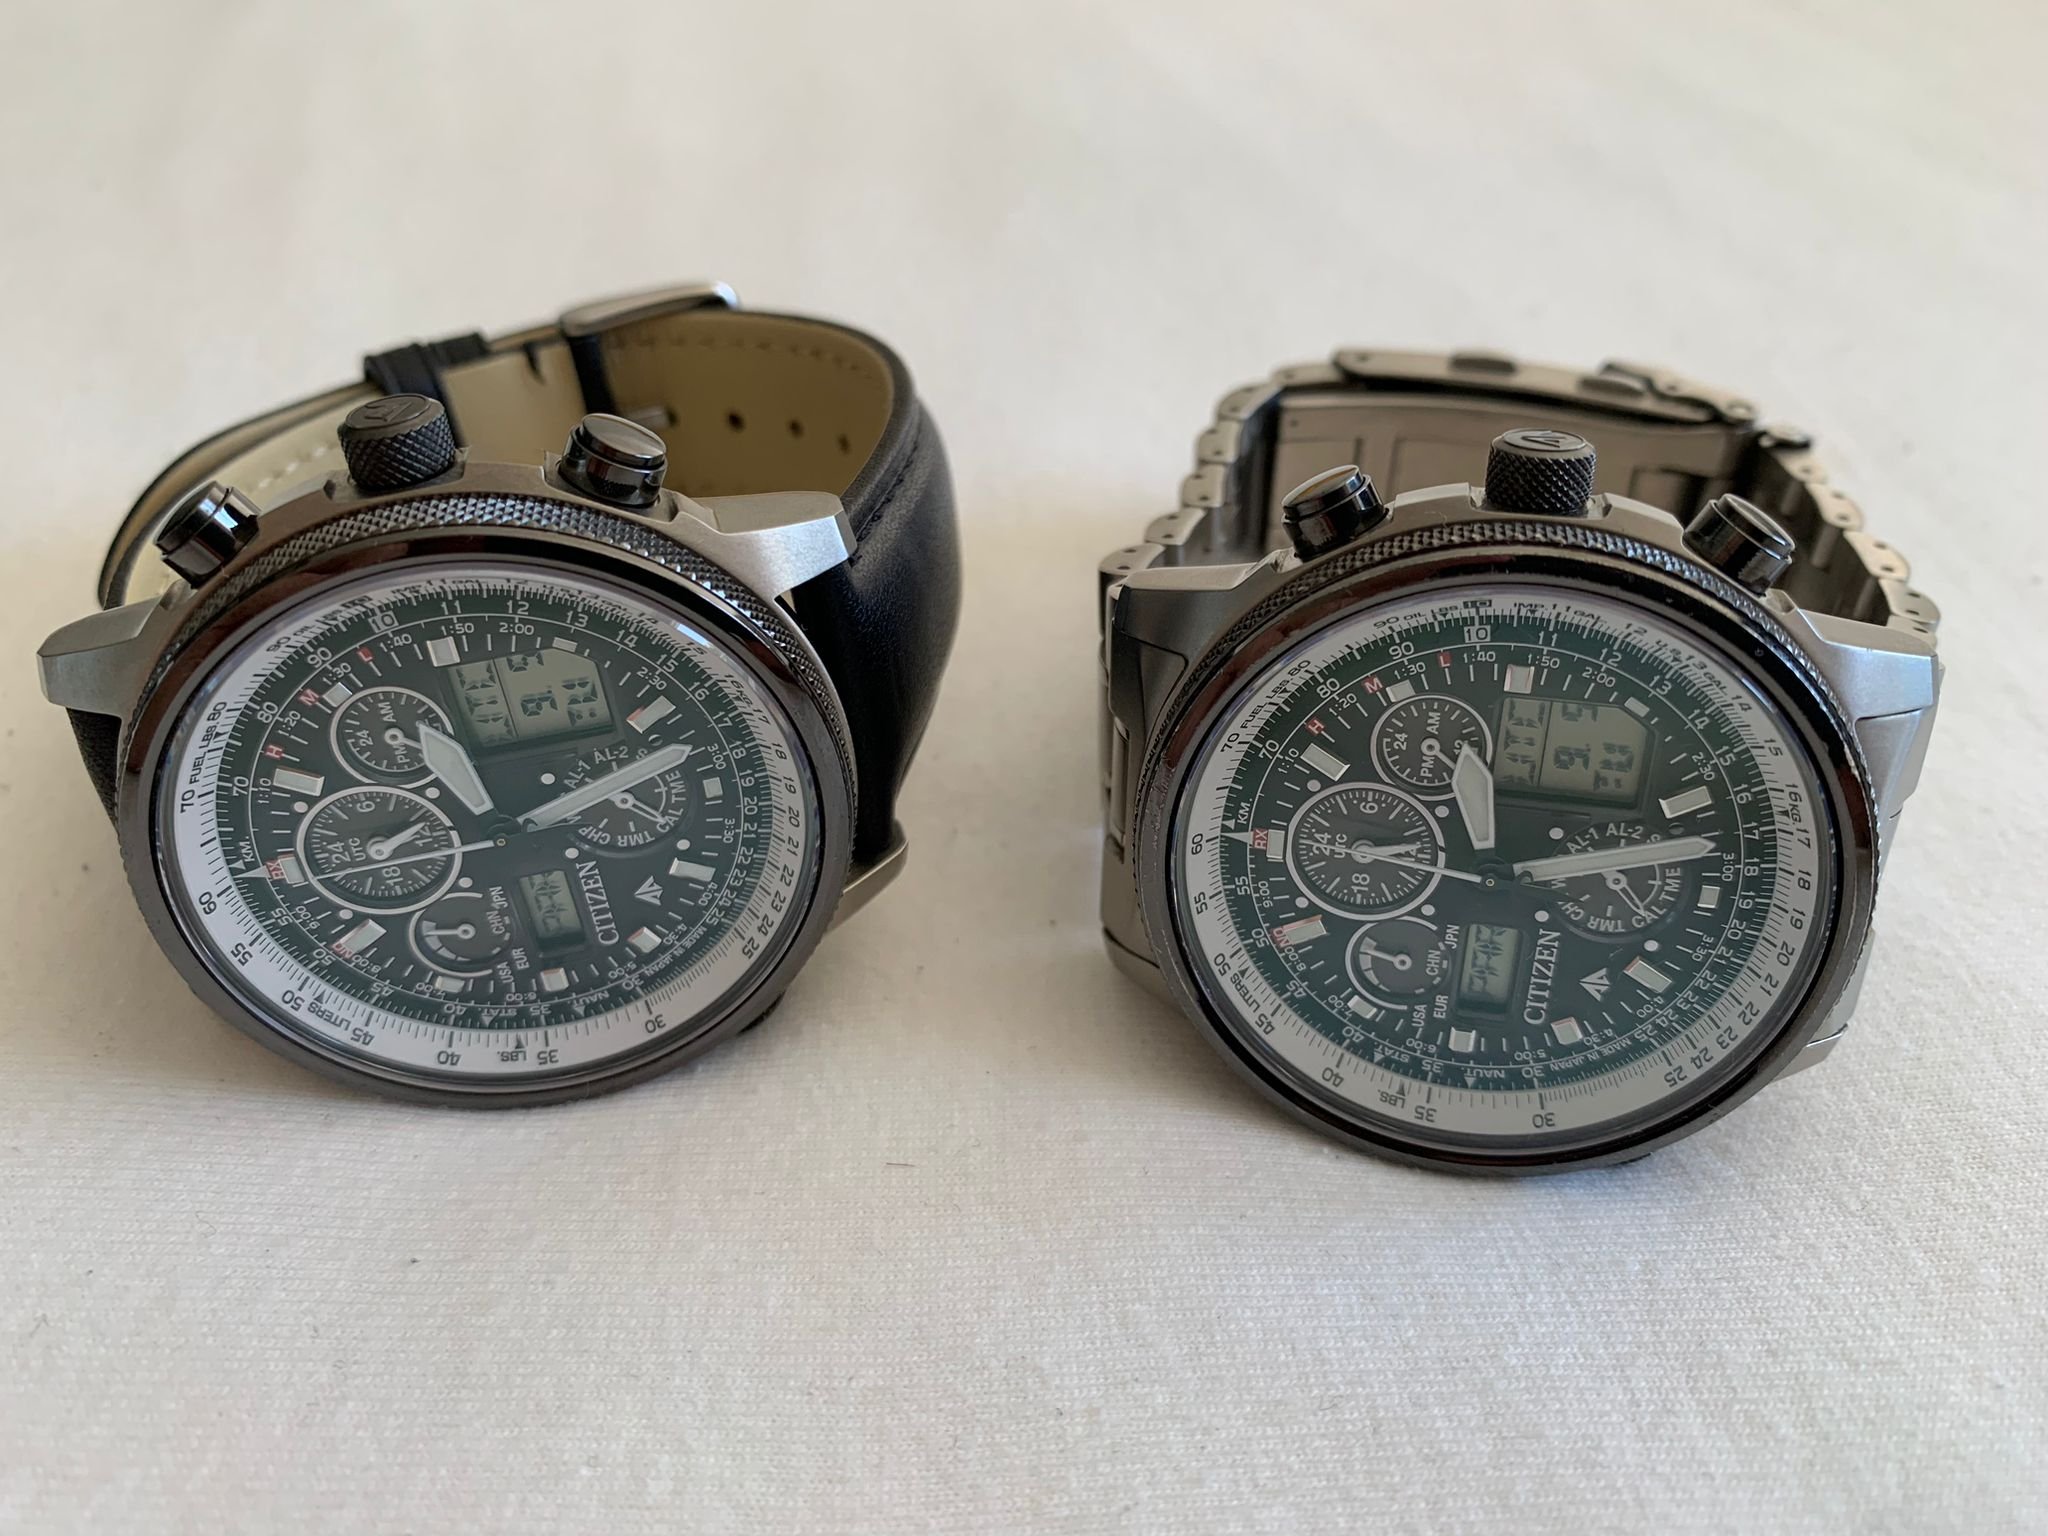 2x Citizen Promaster Sky Pilot PMV65-2272, 1 with strap, 1 with